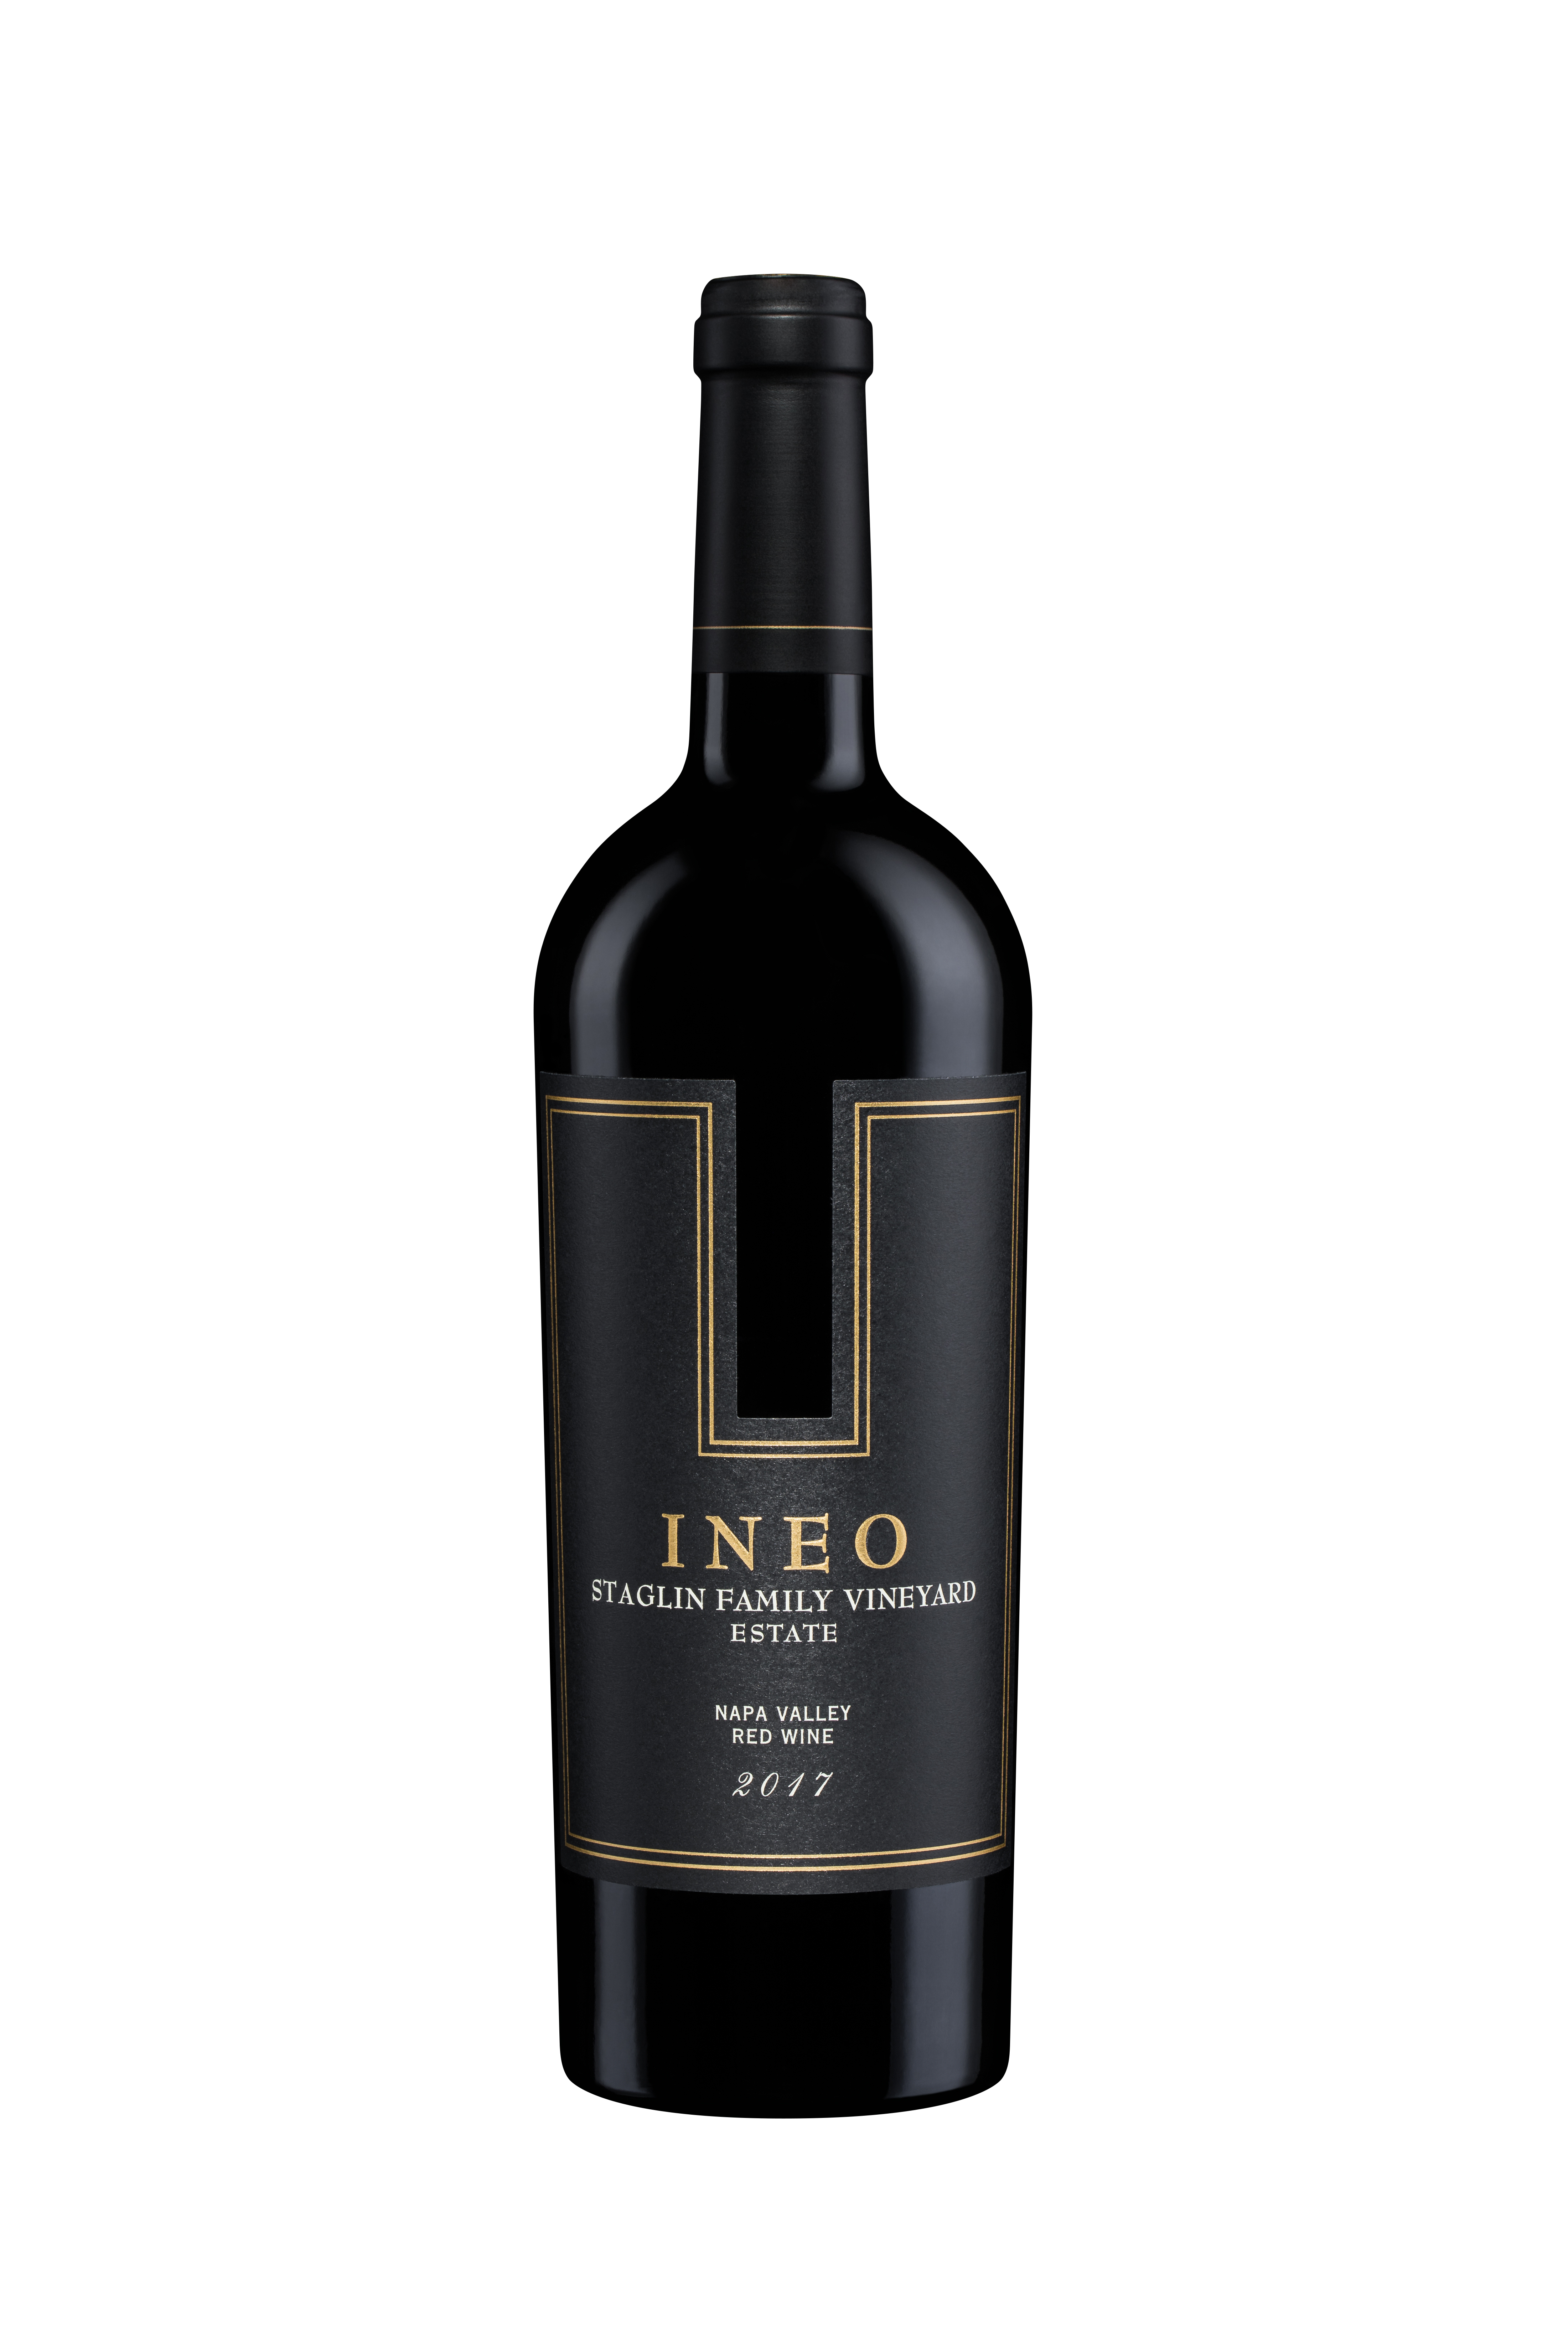 Product Image for Staglin Family Estate INEO 2019 - 750 ml